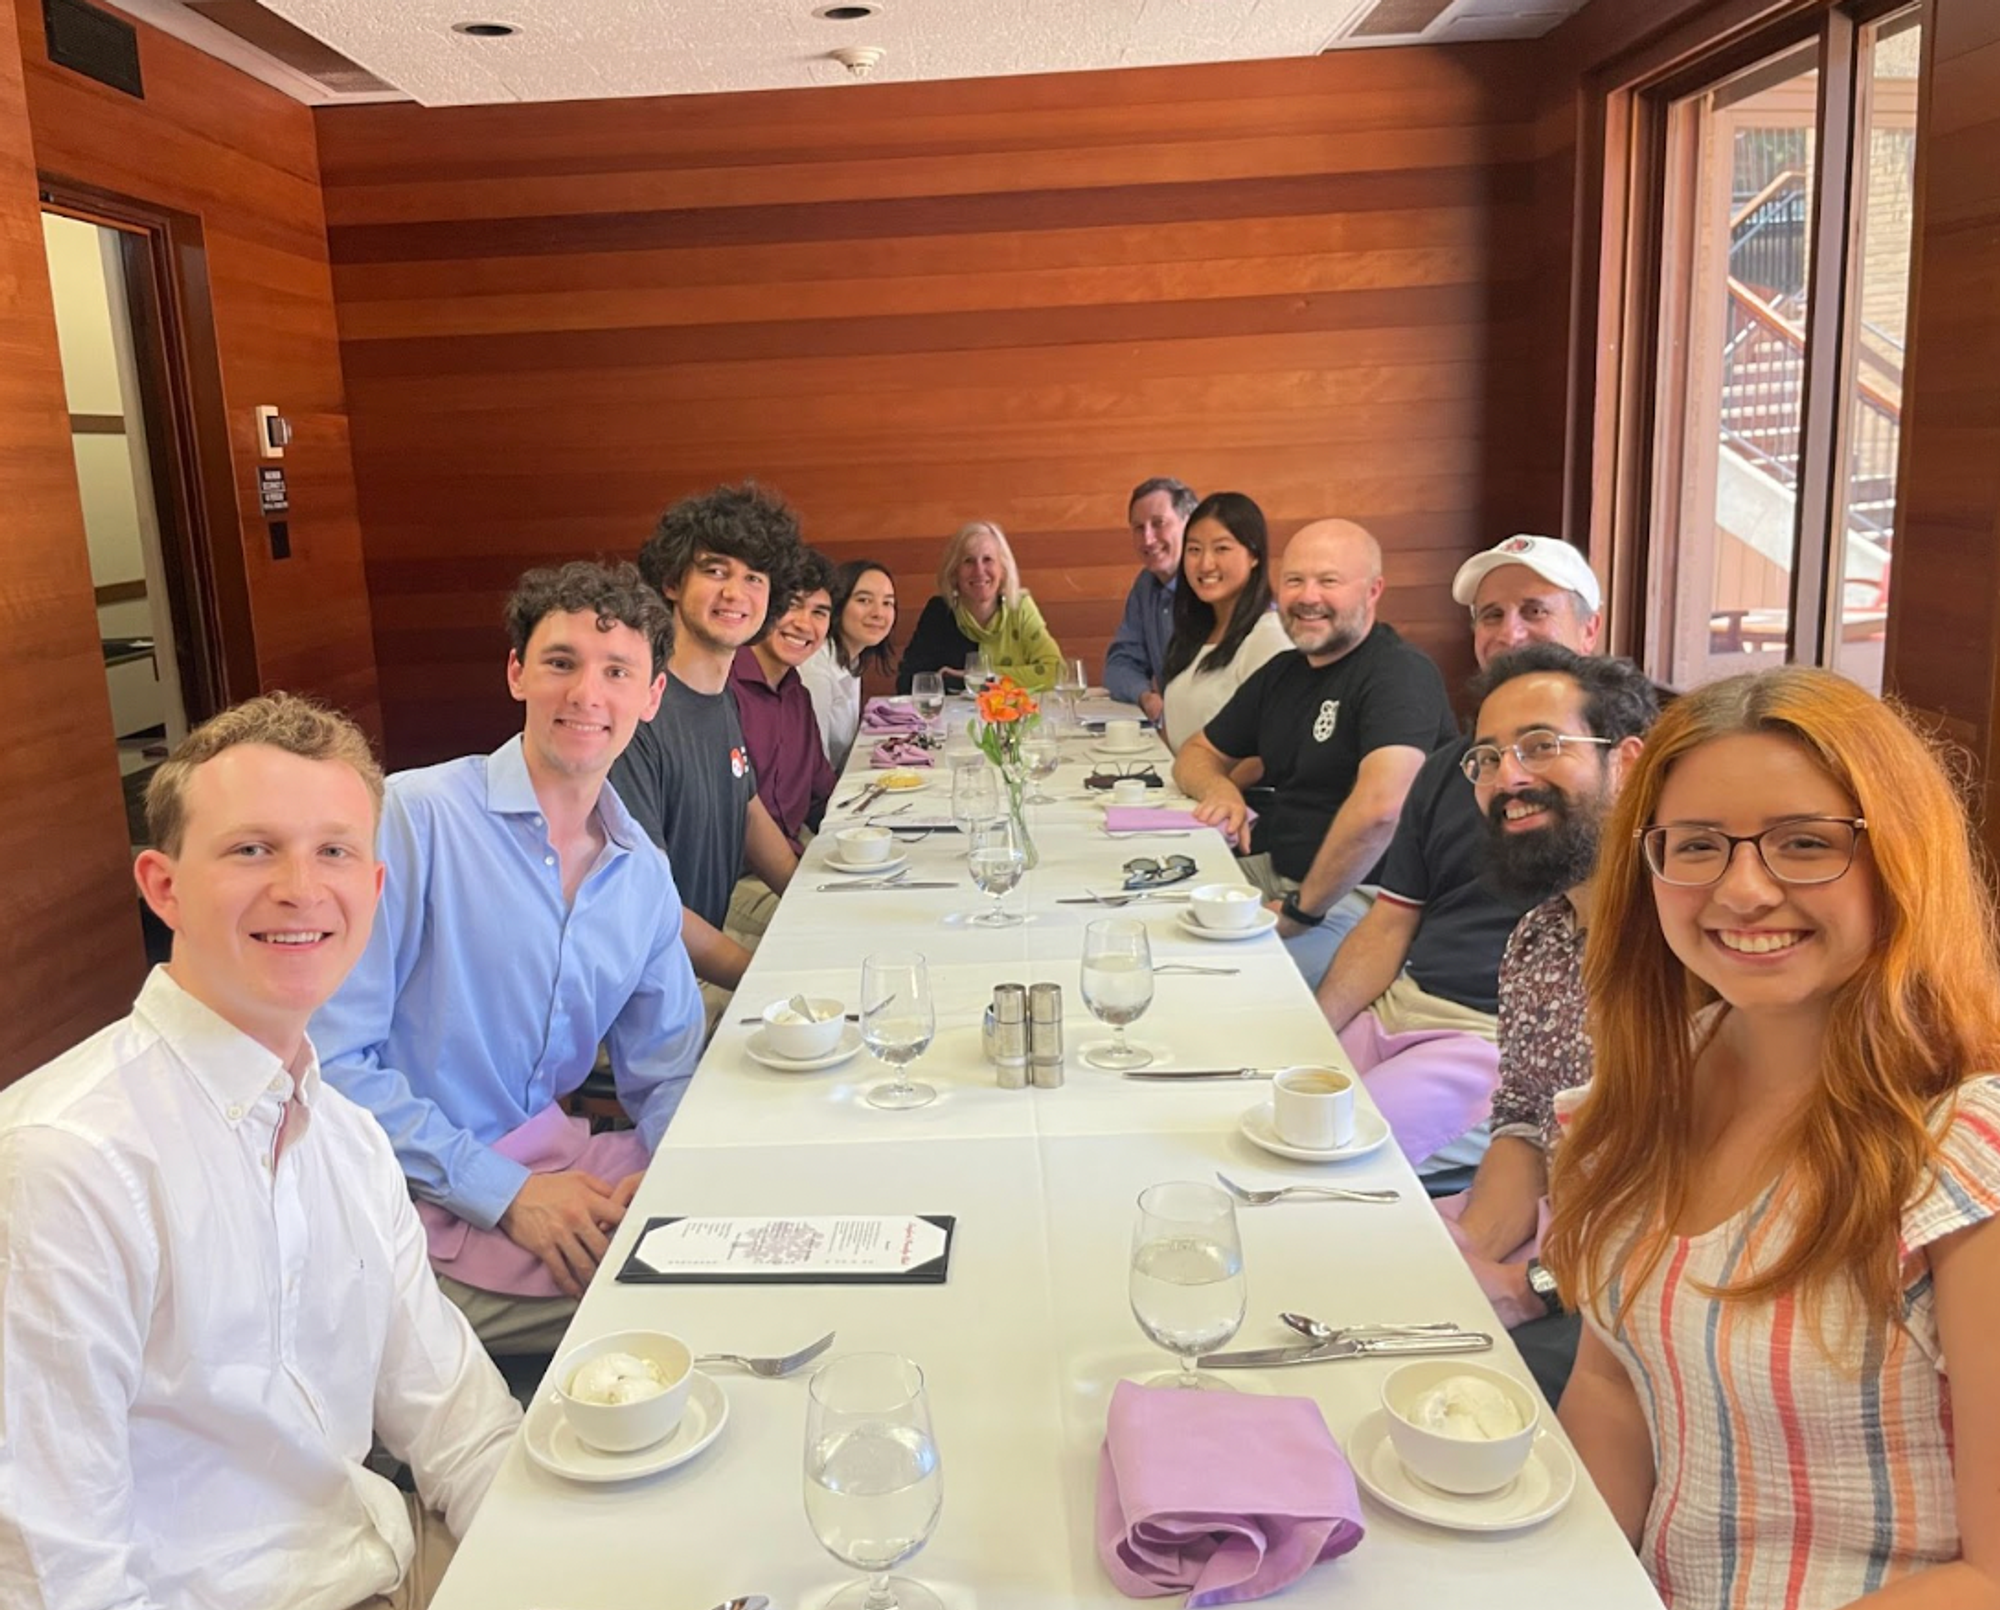 Lunch at the Stanford Alumni Club sparked engaging discussions, from education for under-resourced communities to potential missions on Mars.